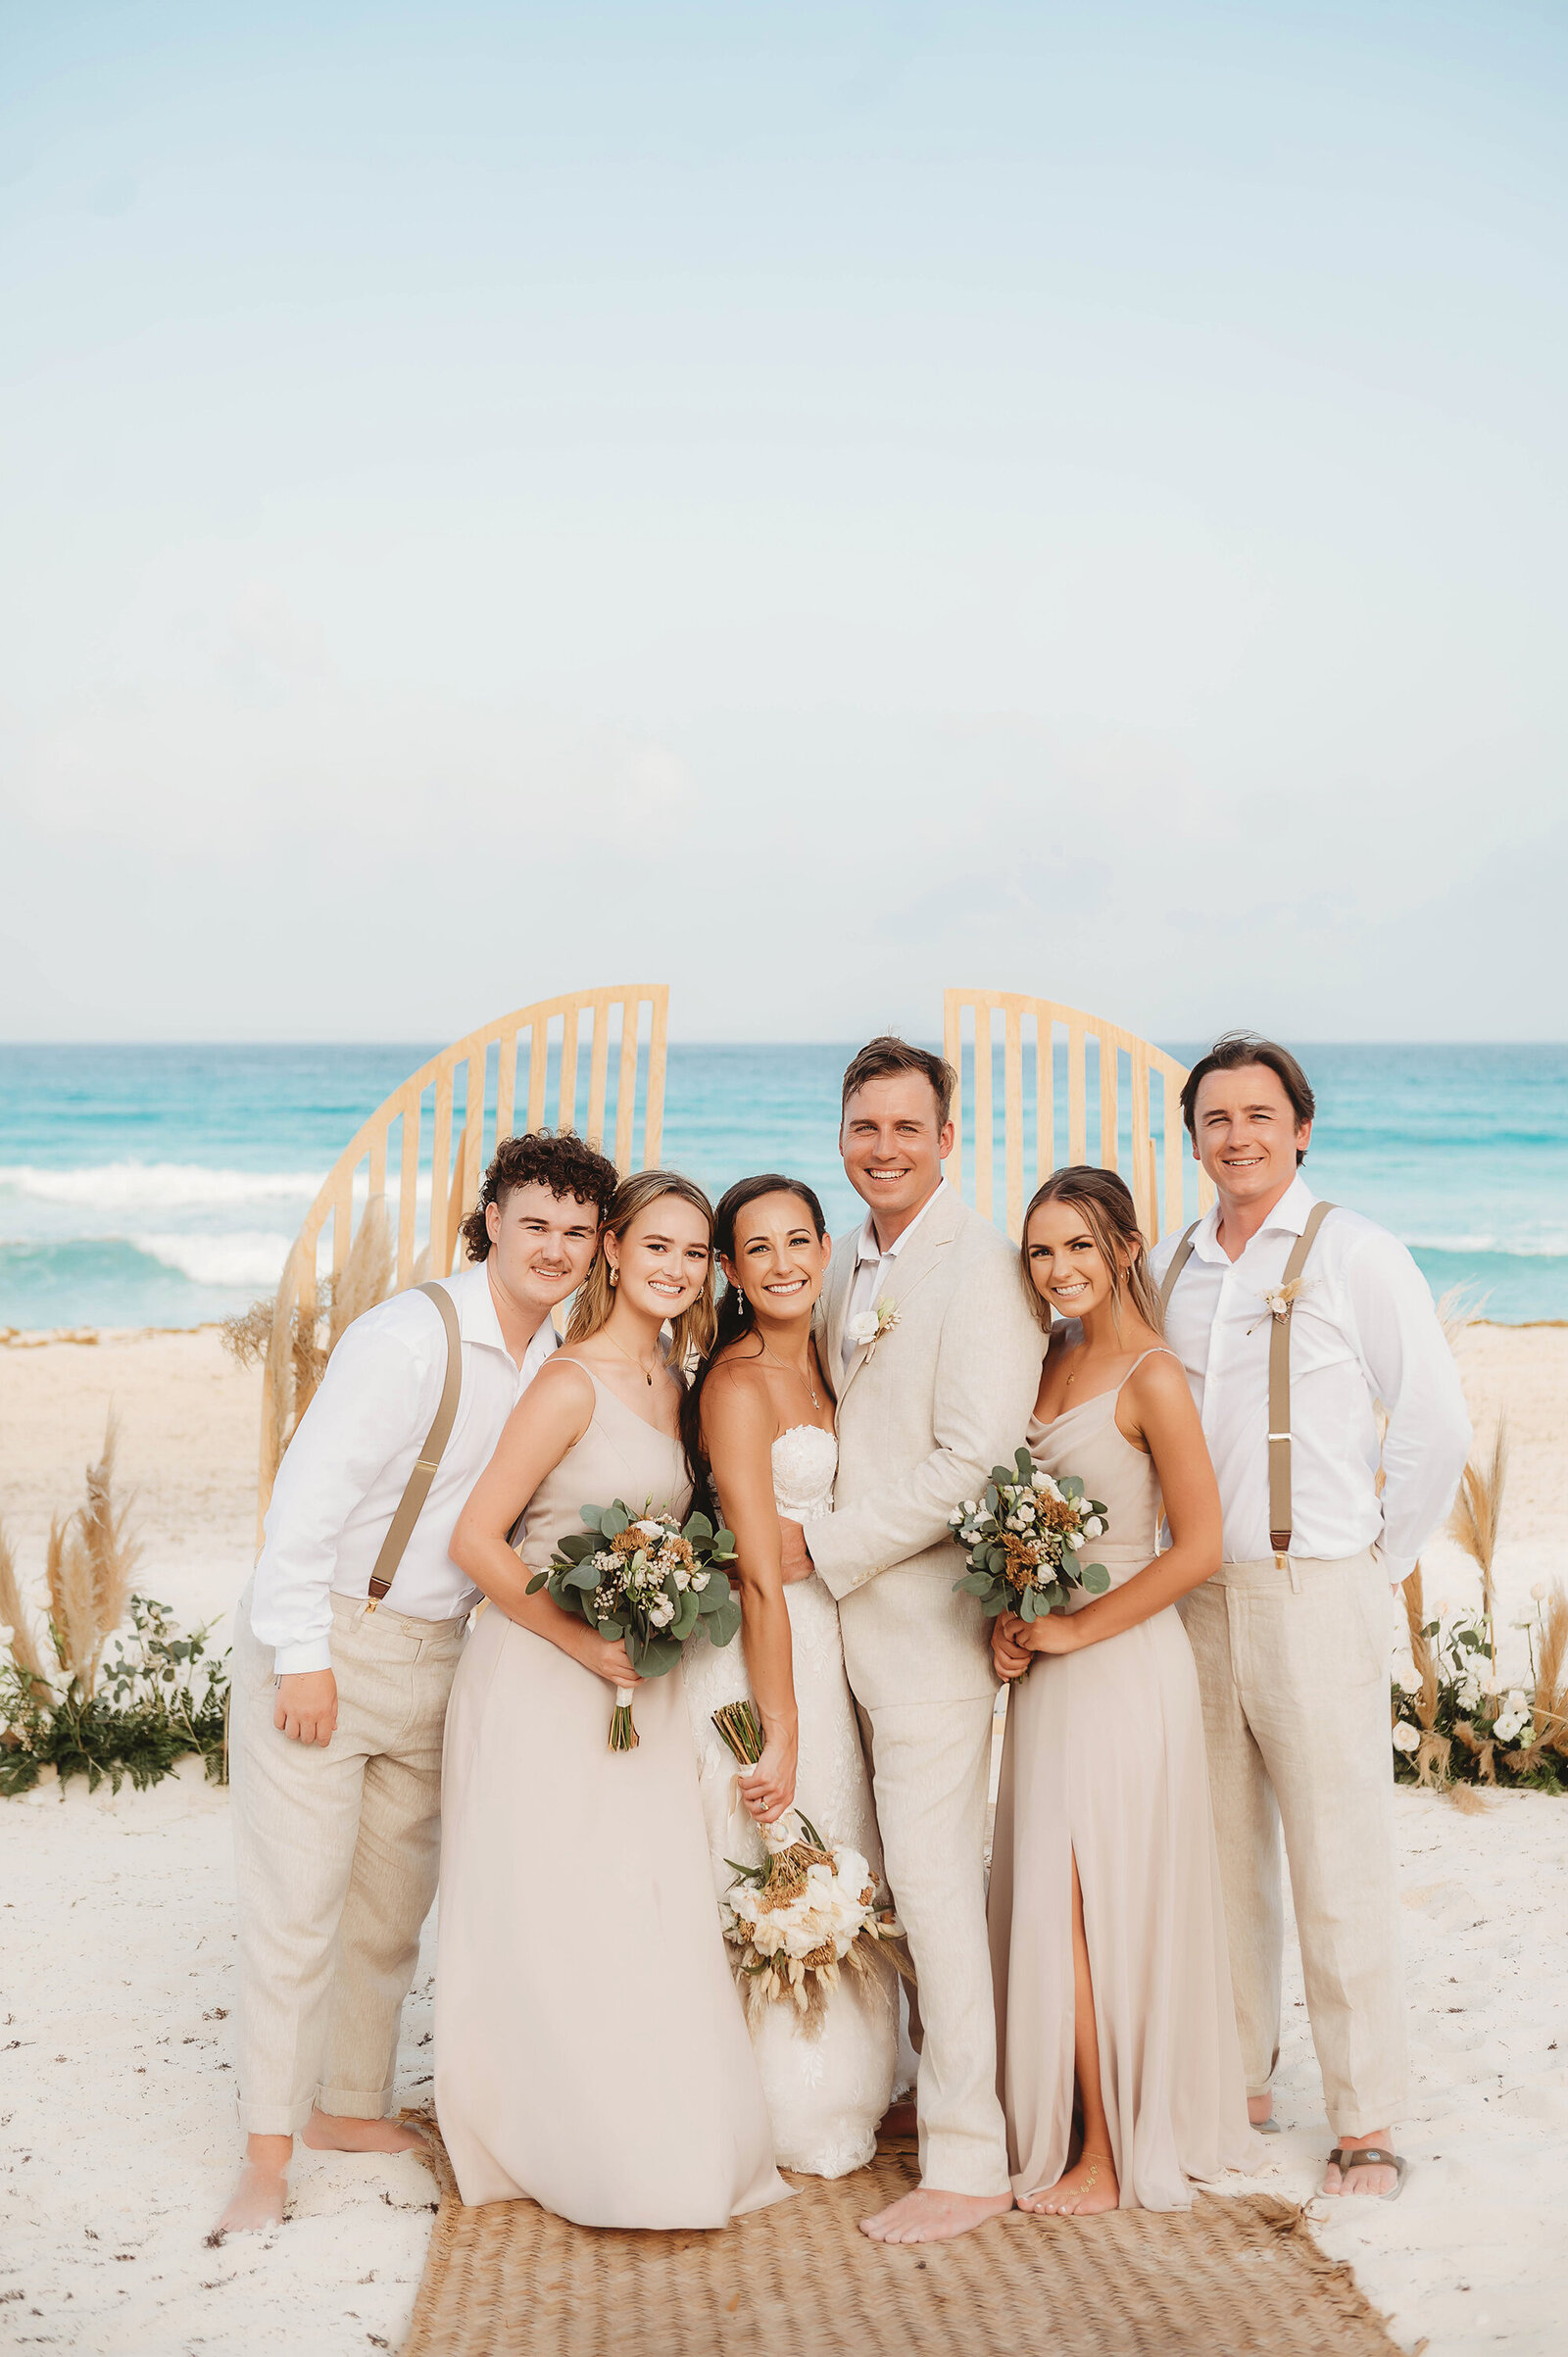 Bridal Party poses for portraits during Micro Wedding at Live Aqua Resort in Cancun Mexico.